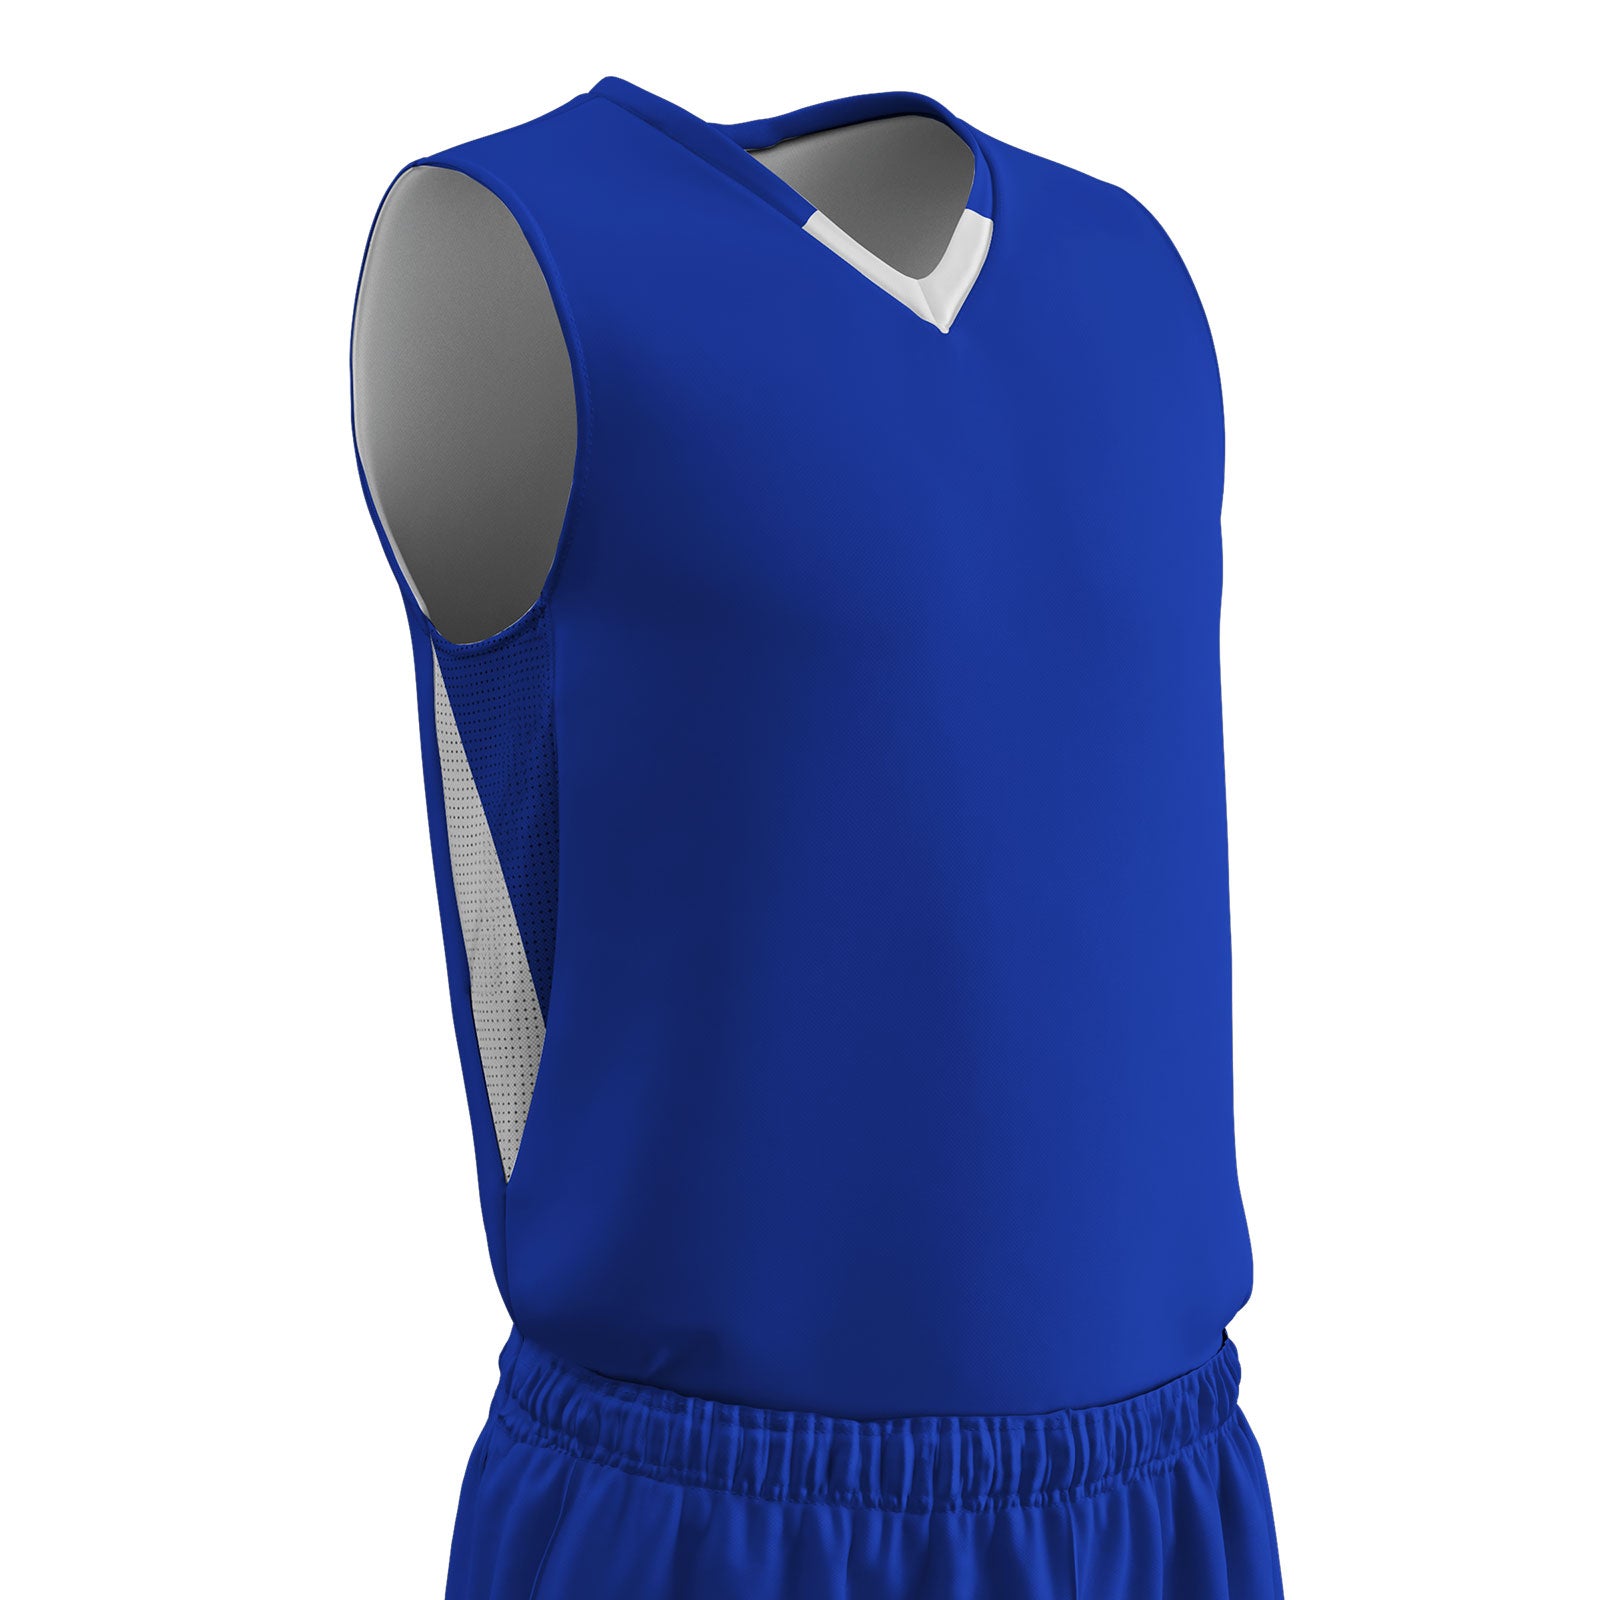 Blue Dragons DISCONTINUED Reversible Basketball Jersey - Adult